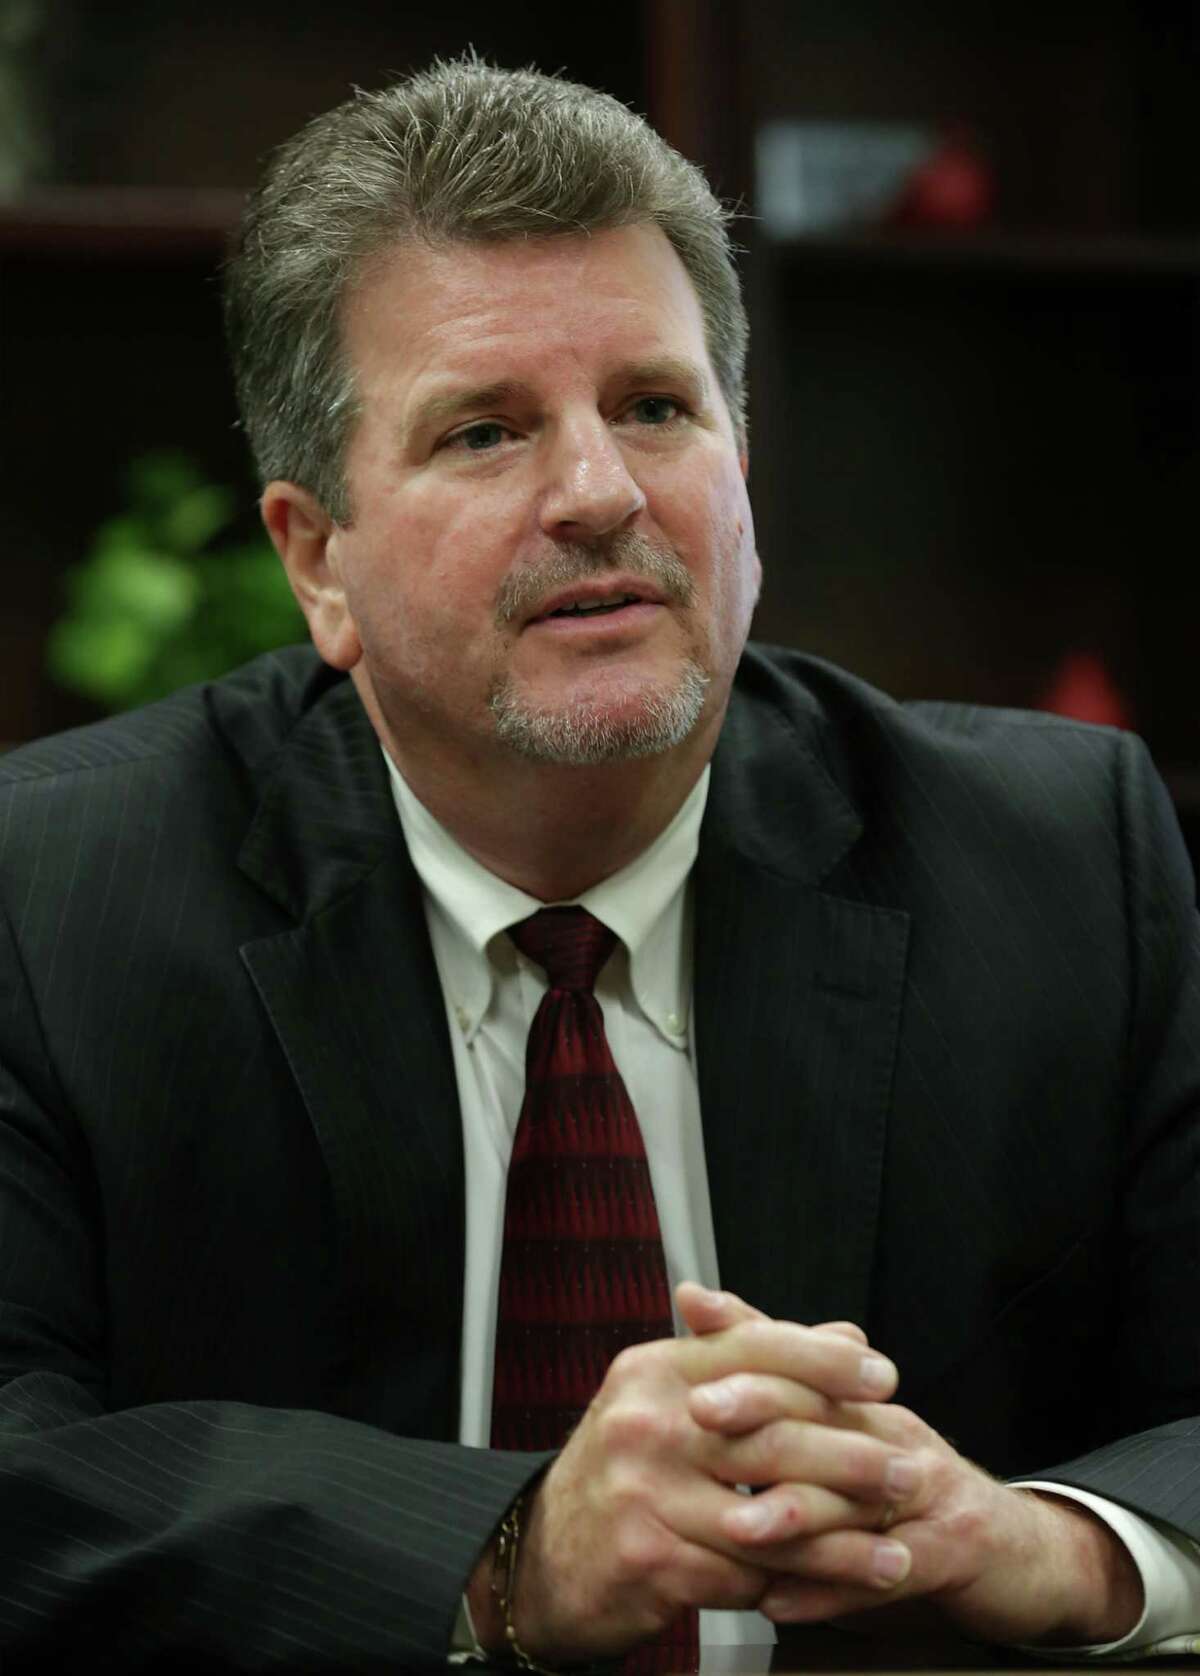 Mark Eads is the new superintendent of Southside ISD. He spoke from his office on Tuesday, May 10, 2016.